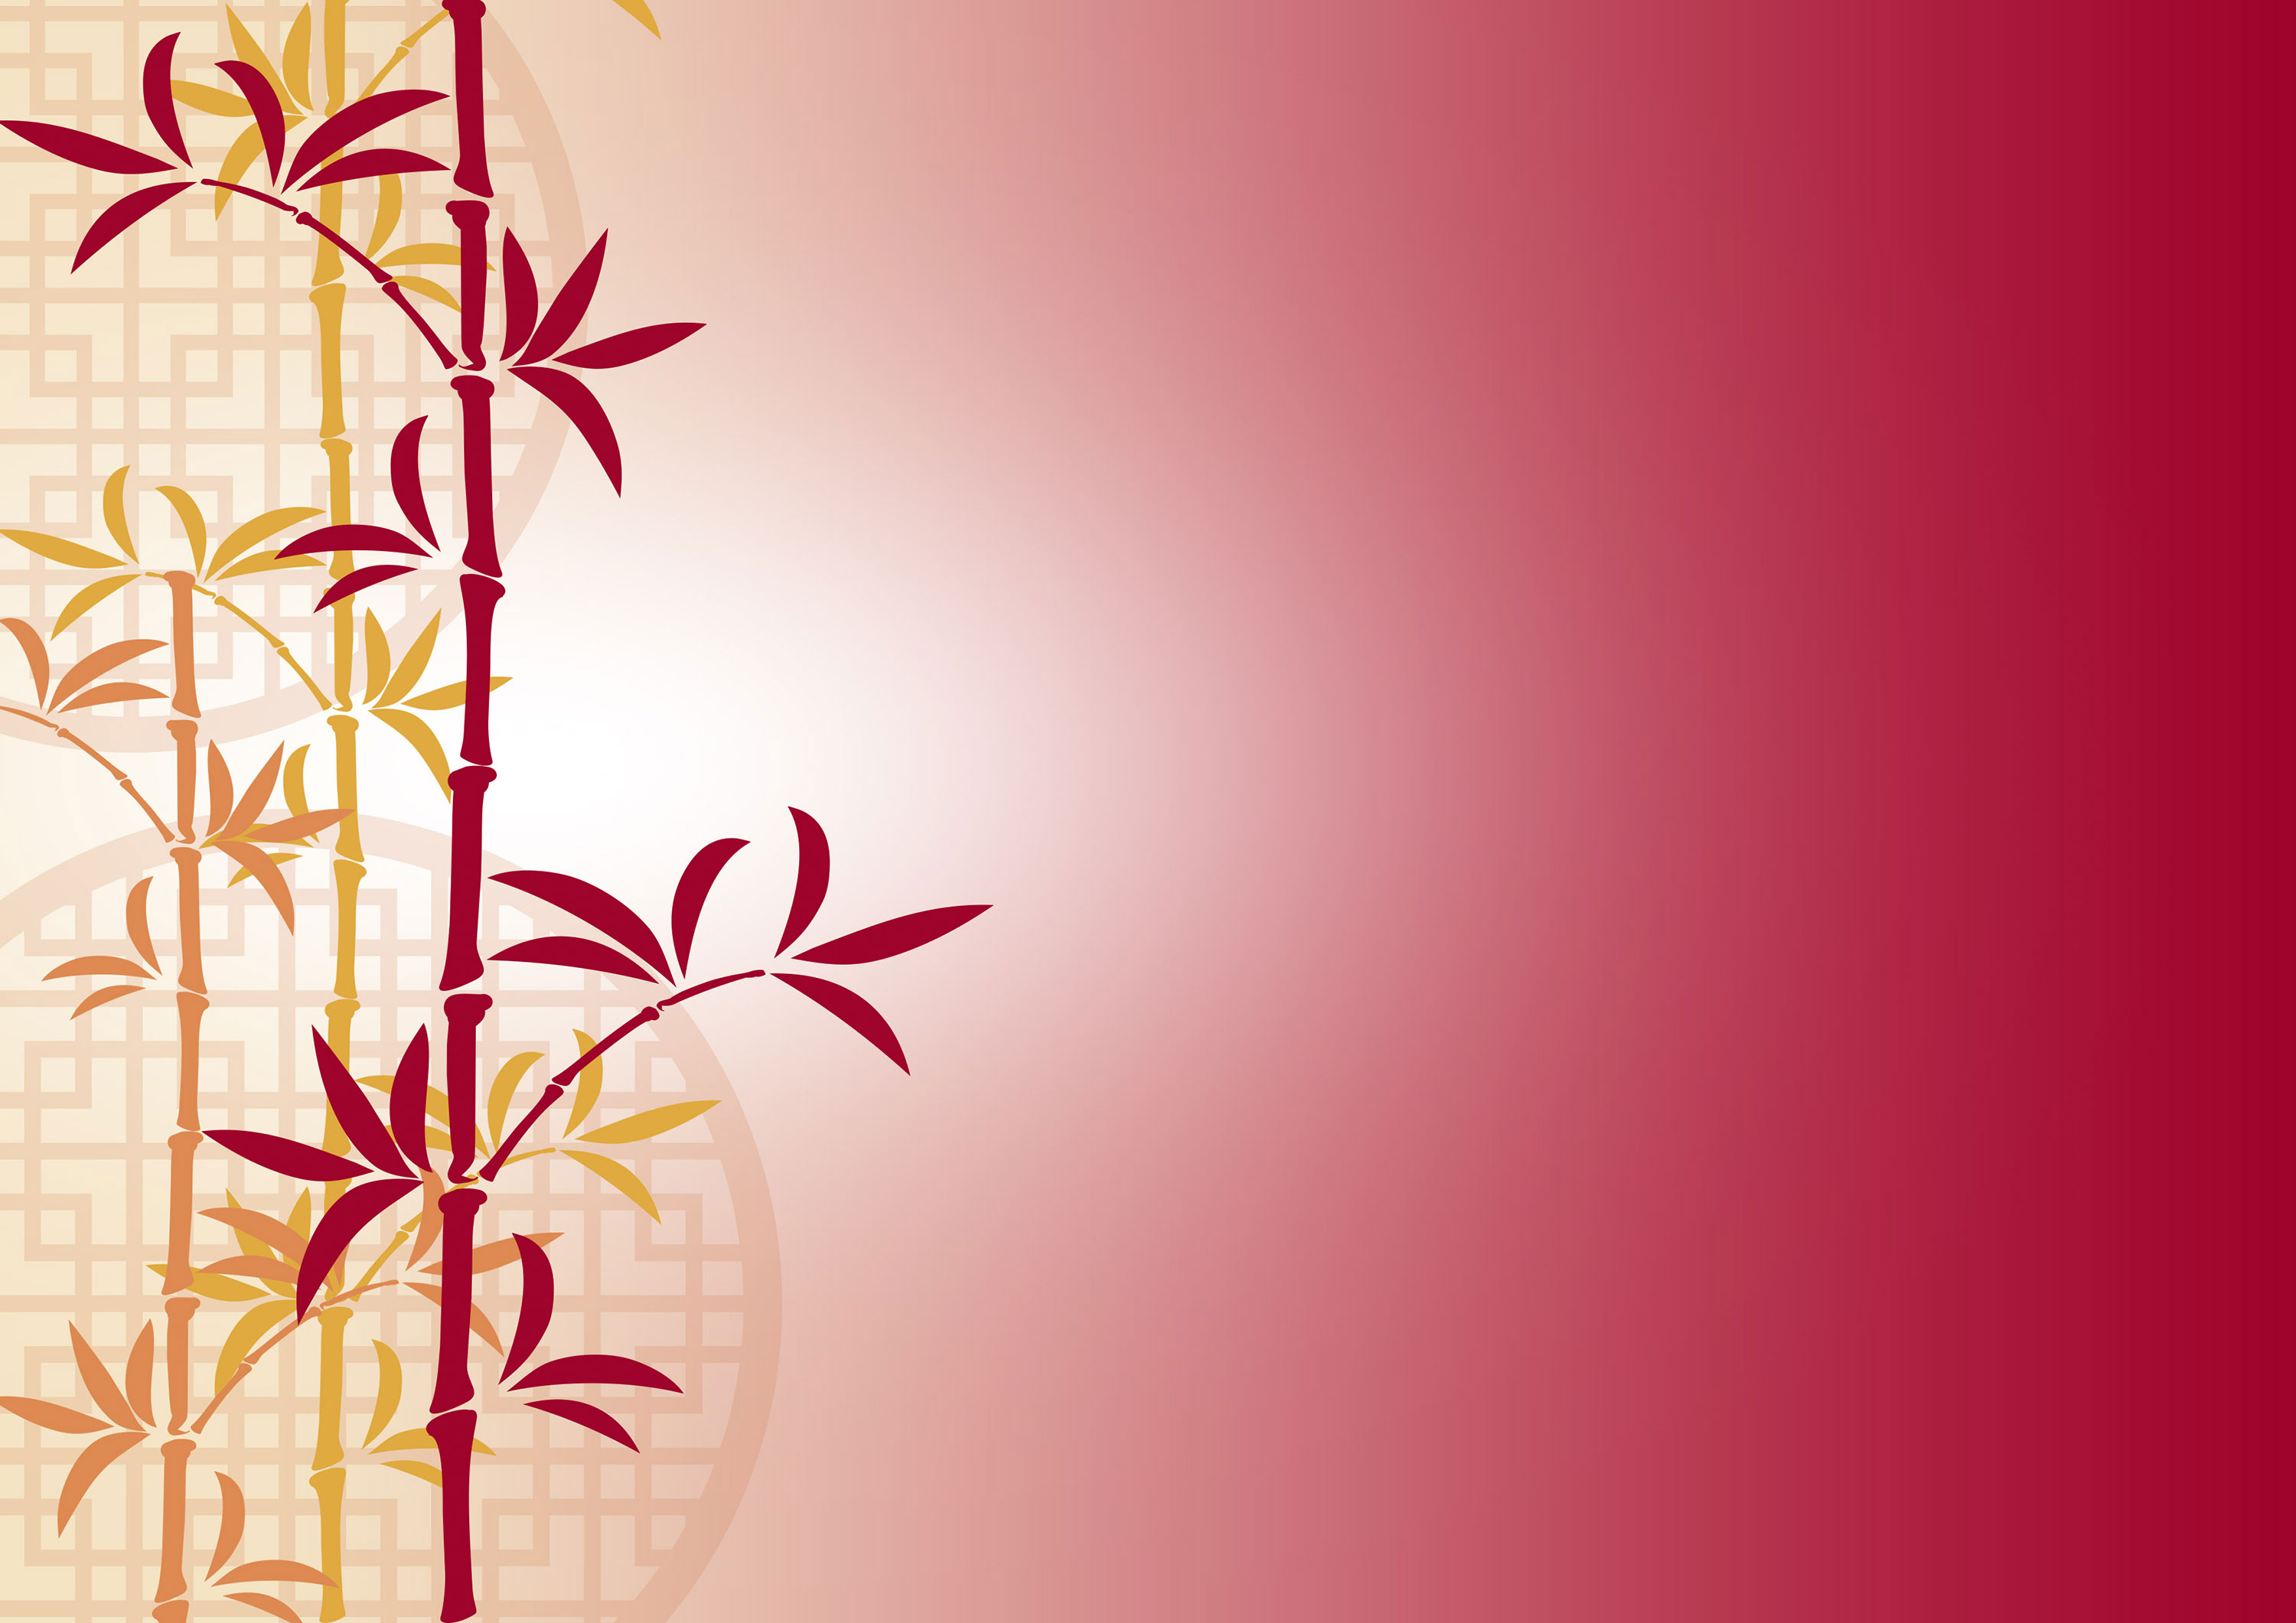 Chinese Lunar New Year Background HD Wallpaper For